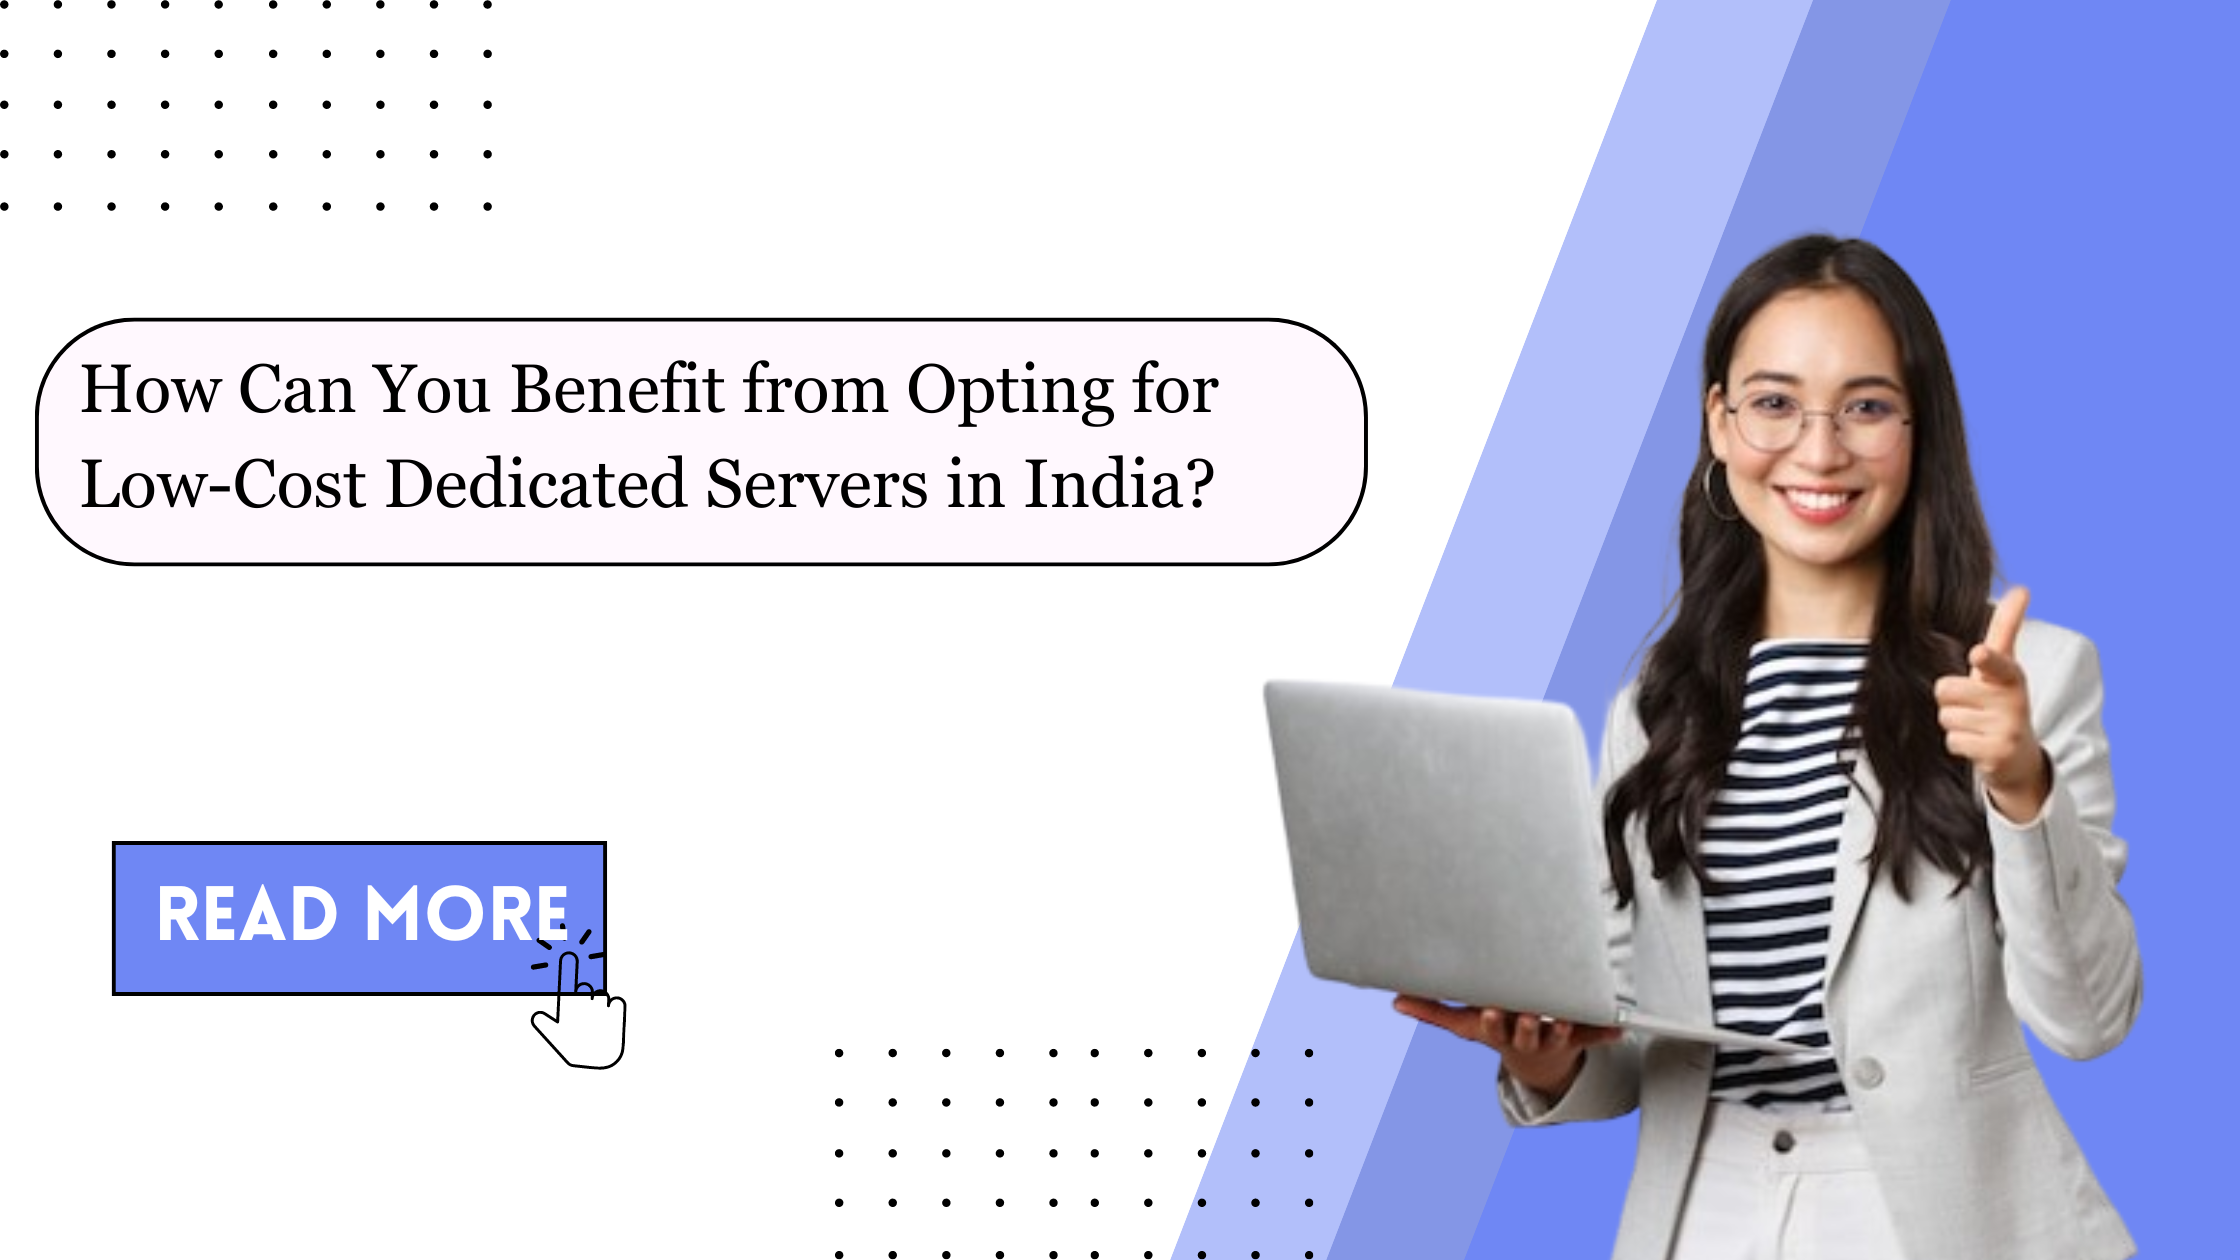 How Can You Benefit from Opting for Low-Cost Dedicated Servers in India